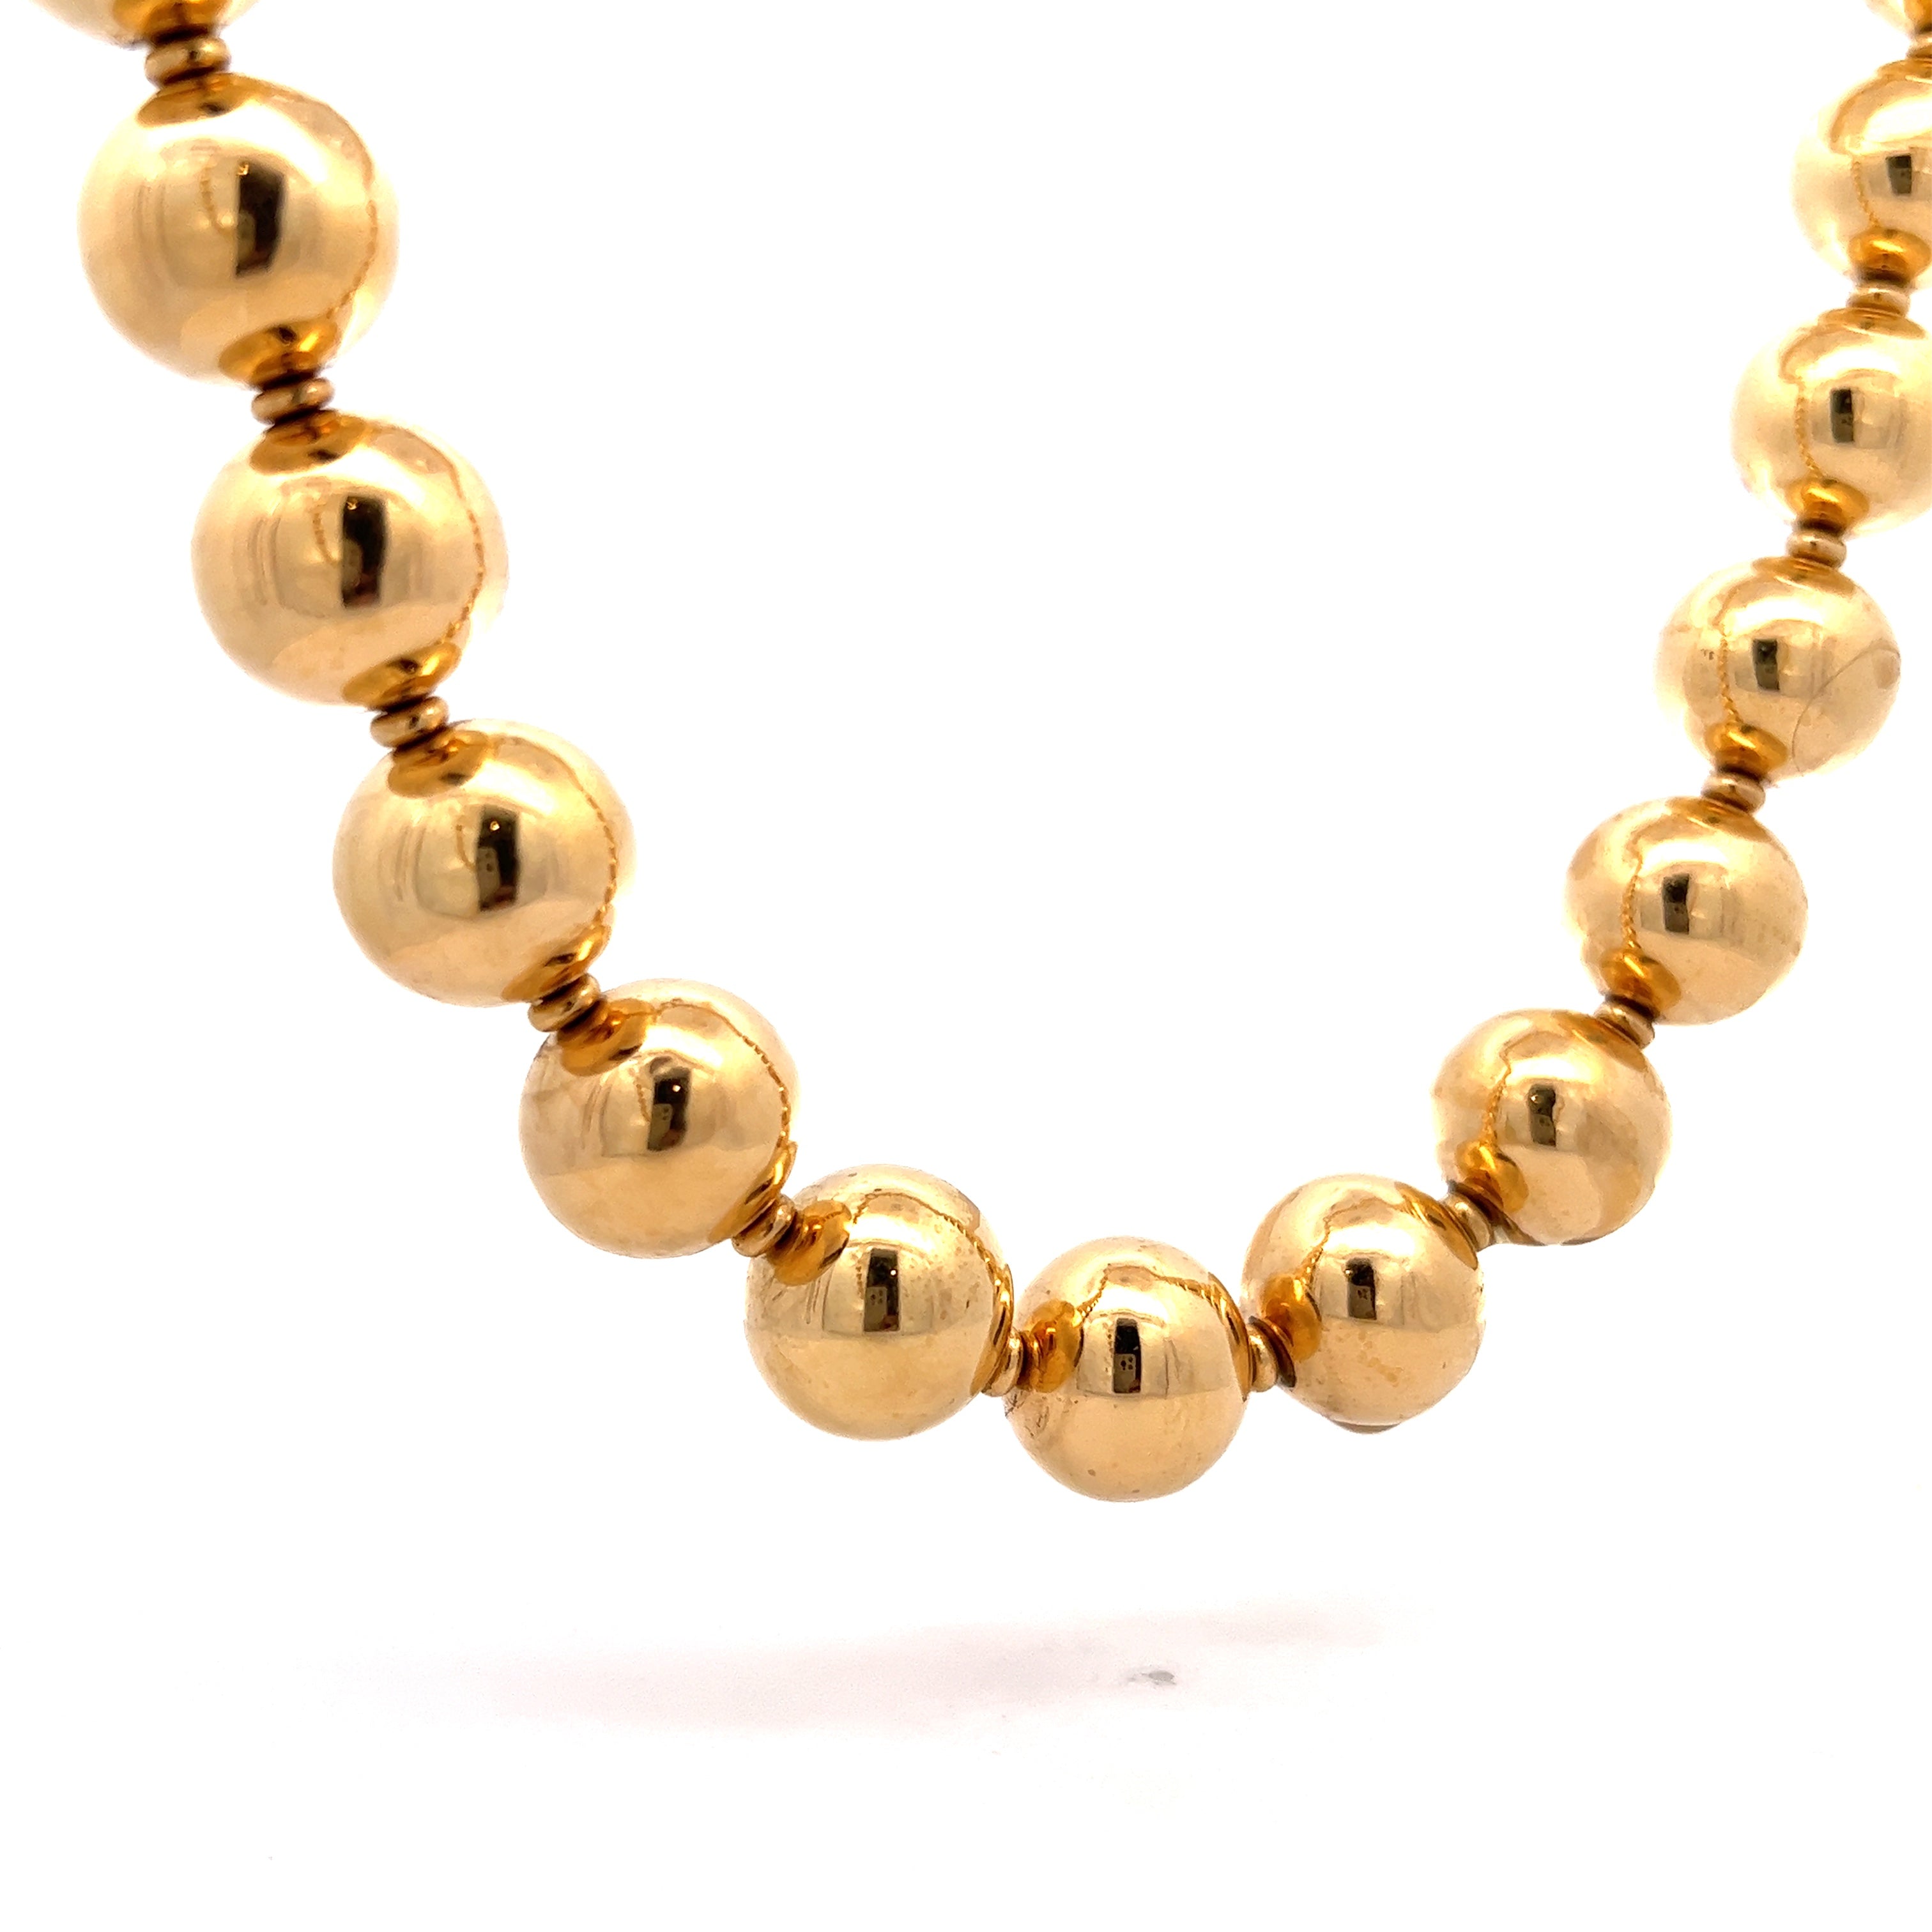 Ruff Goldsmiths: Necklace Heliodore (golden beryl) and 18K gold beads